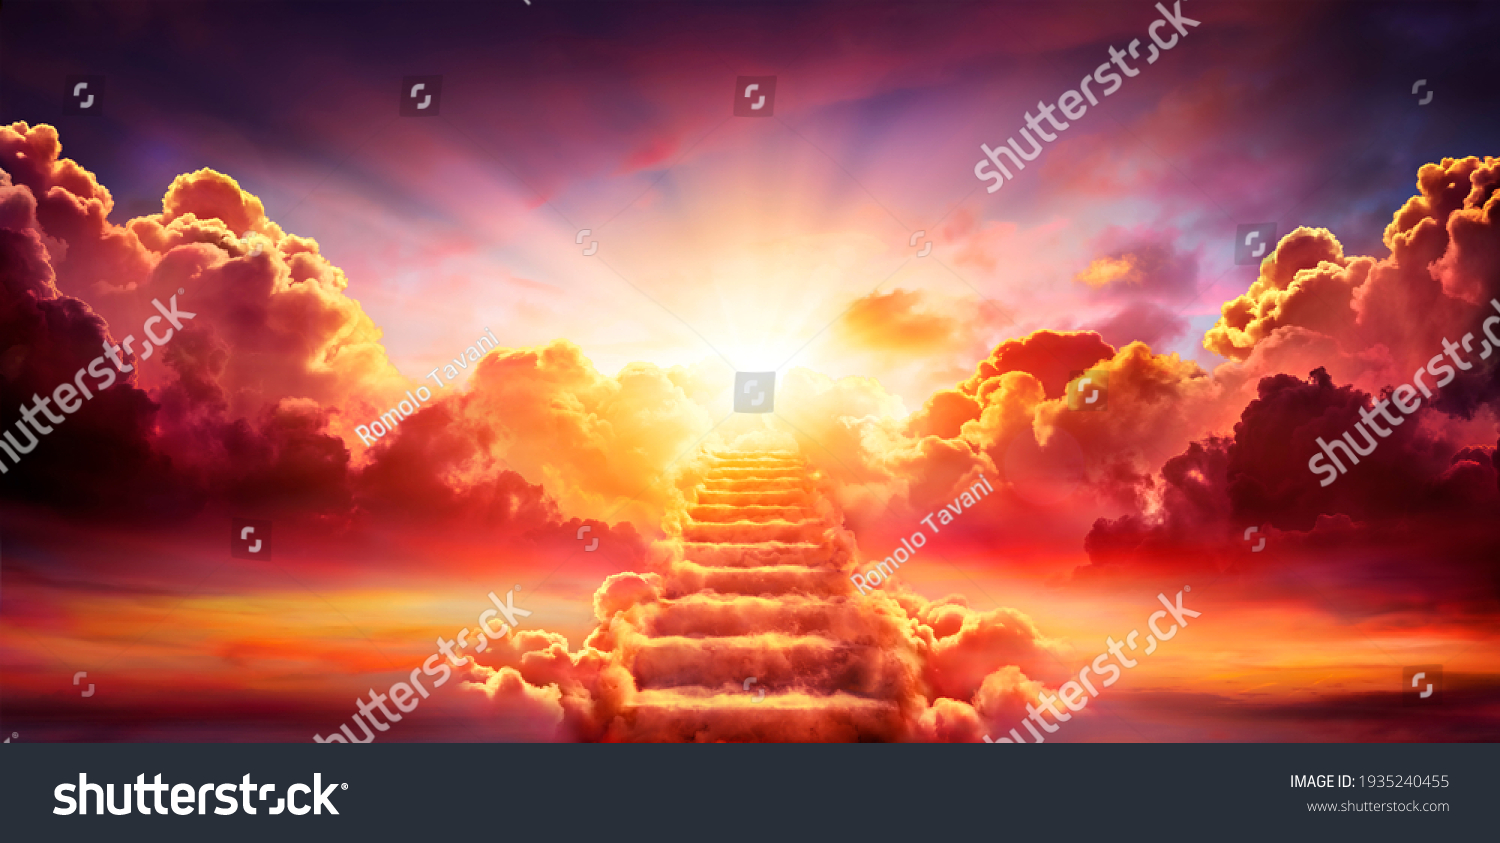 Stairway Leading Up To Sky At Sunrise - Resurrection And Entrance Of Heaven #1935240455